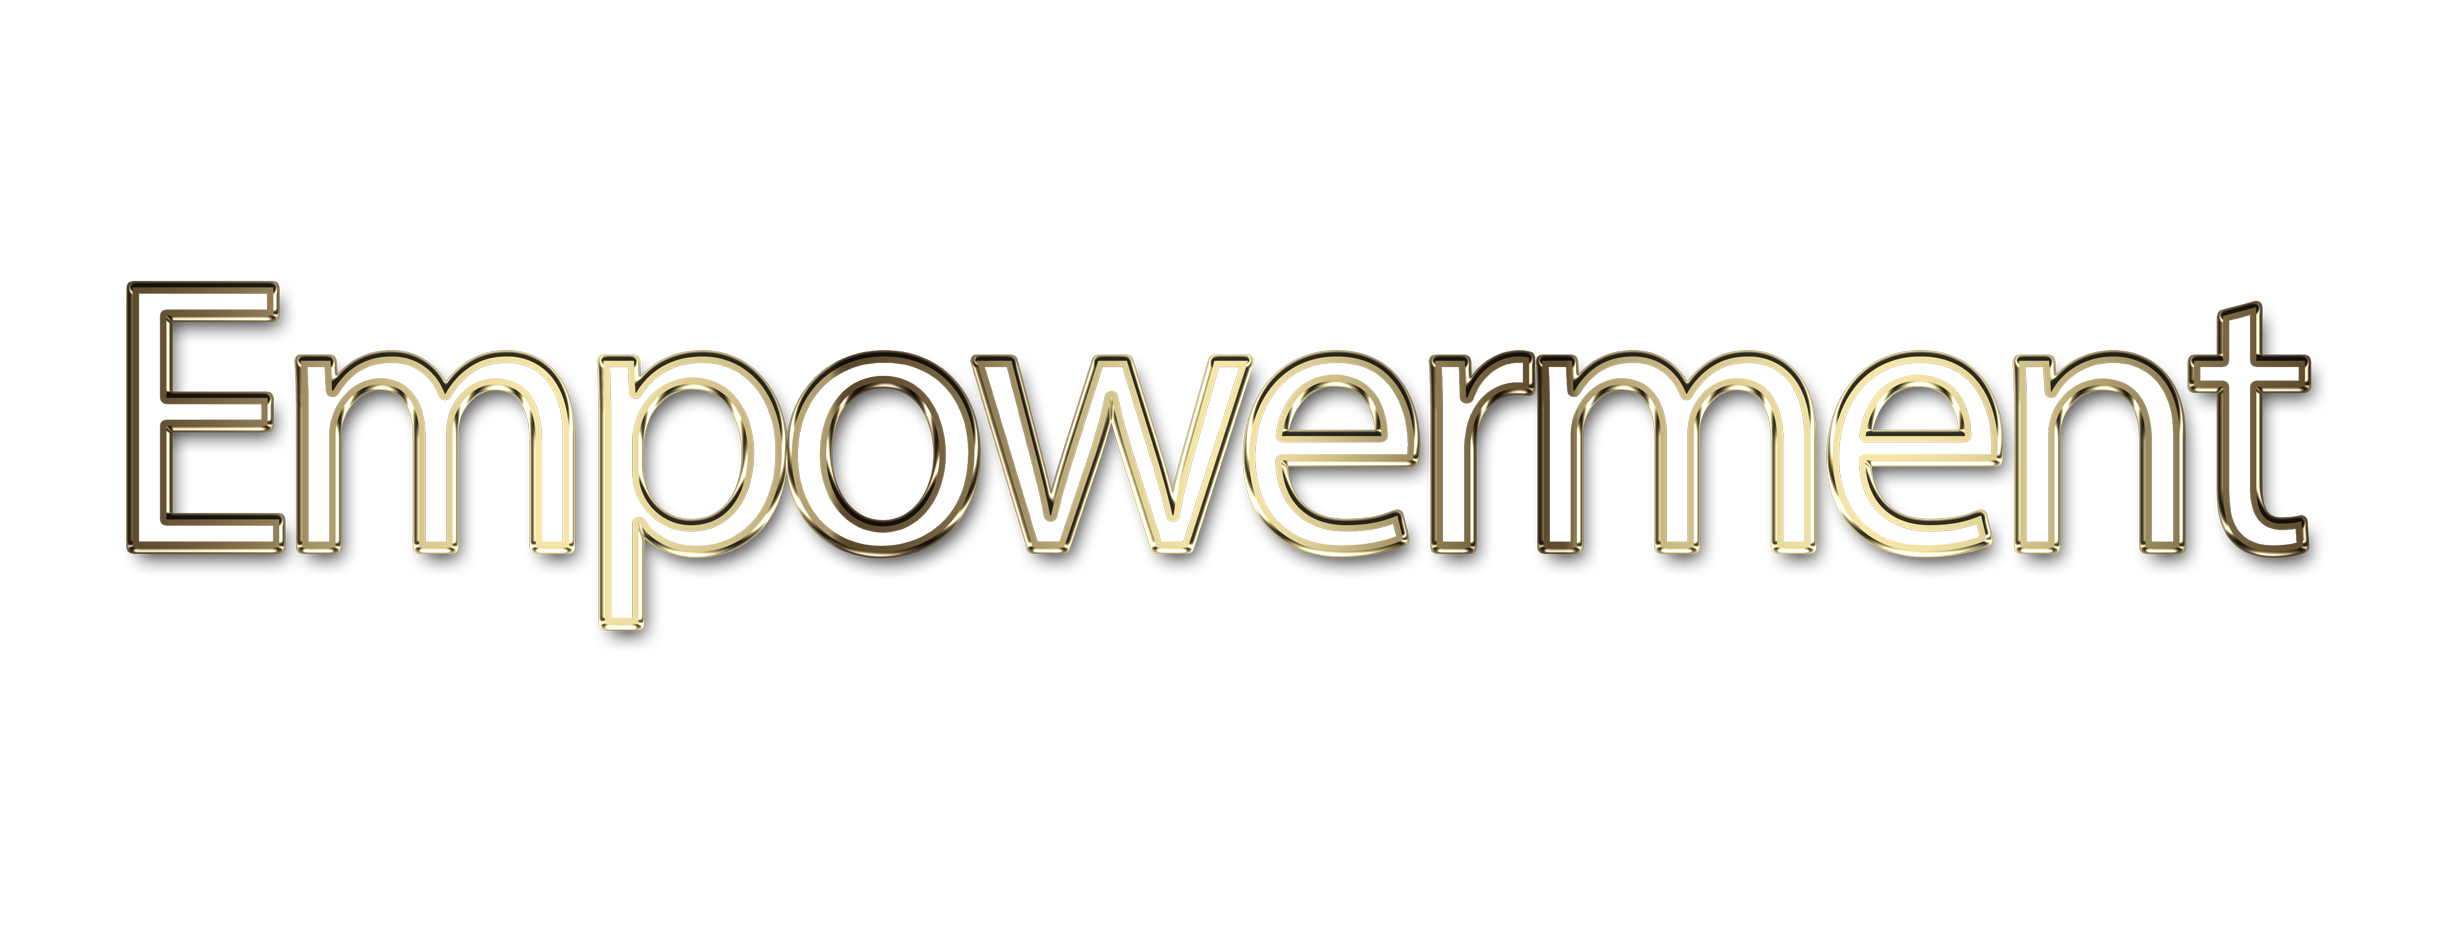 Empowerment png, word Empowerment png, Empowerment word png, Empowerment text png, Empowerment letters png, Empowerment word art typography PNG images, transparent png